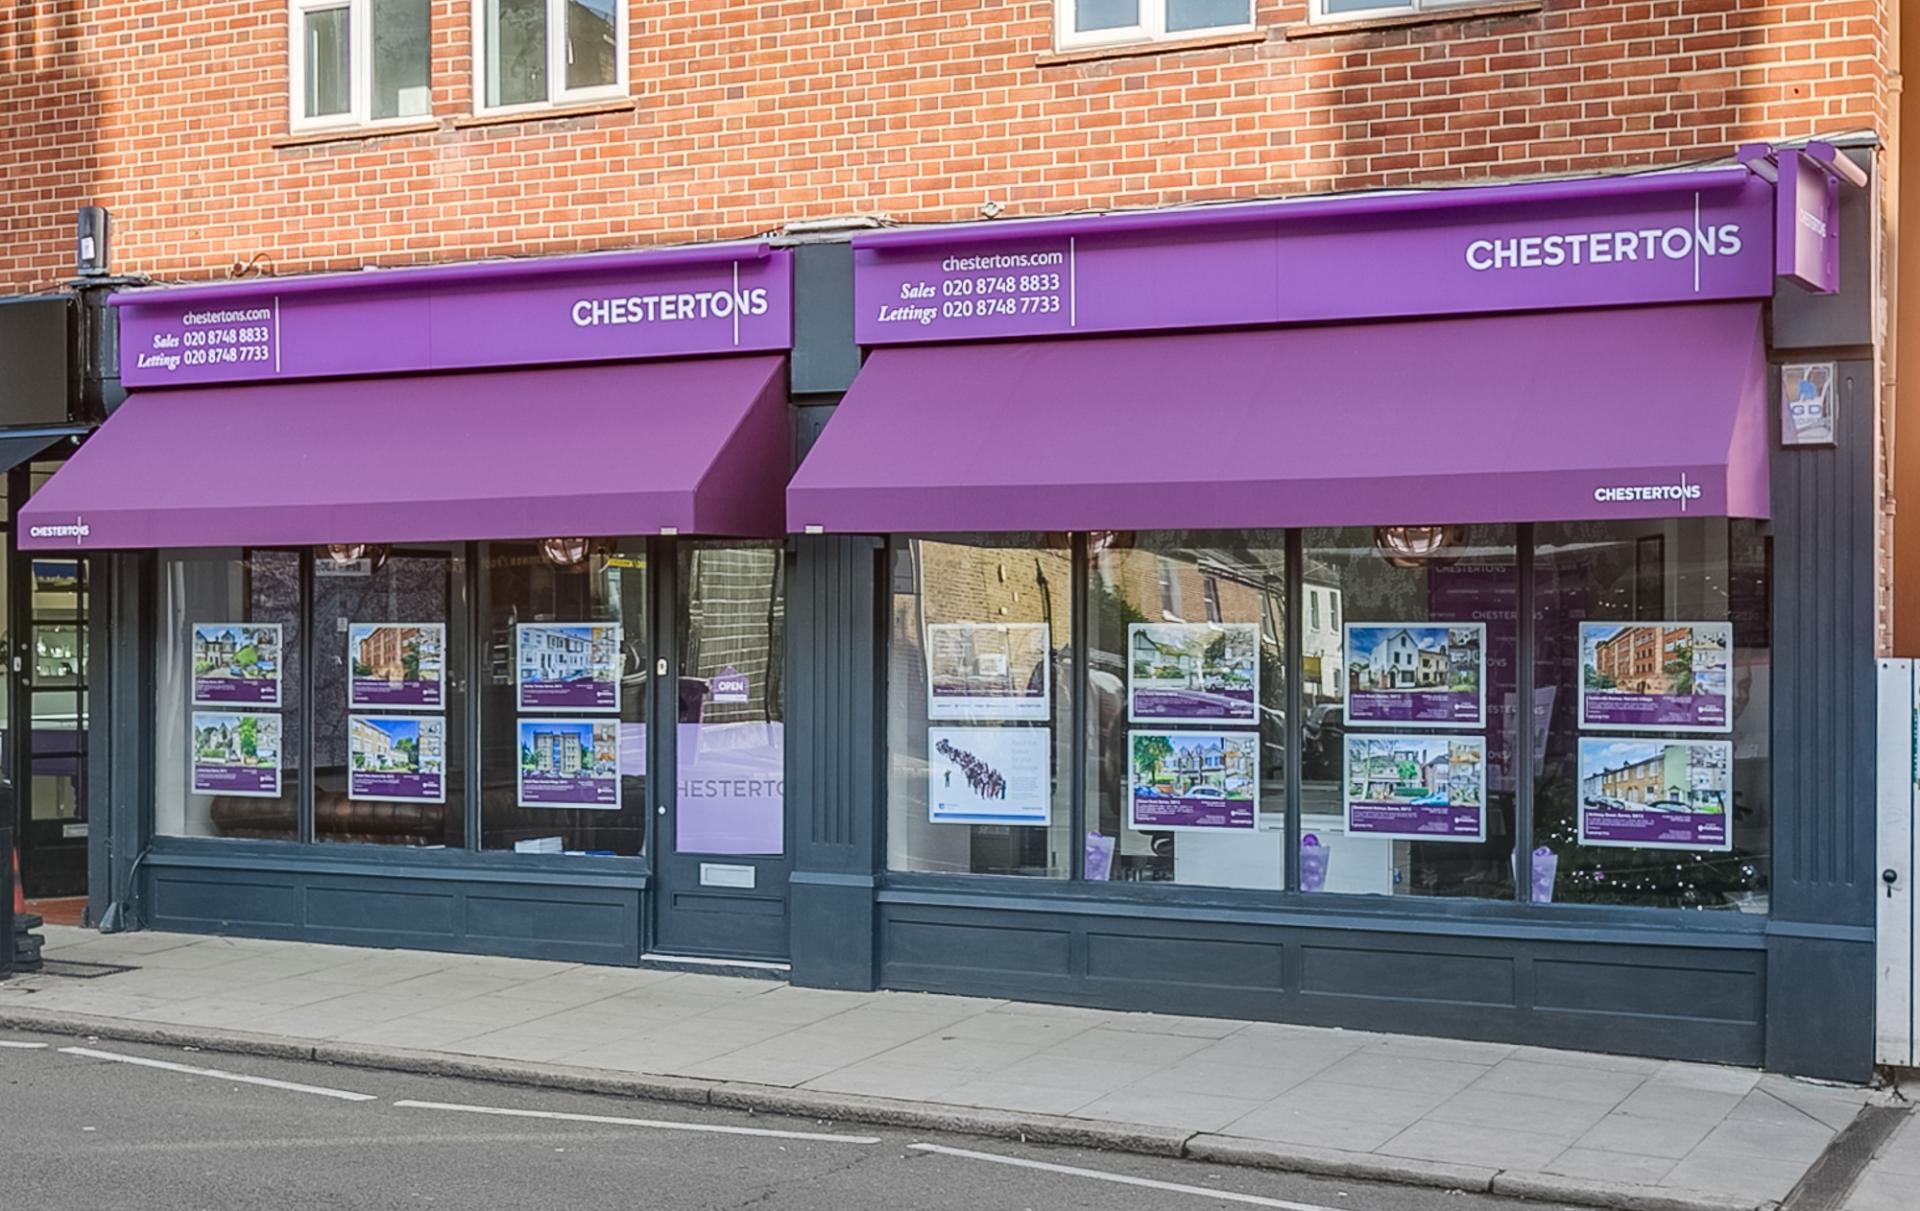 UK estate agent Chestertons acquired by European group